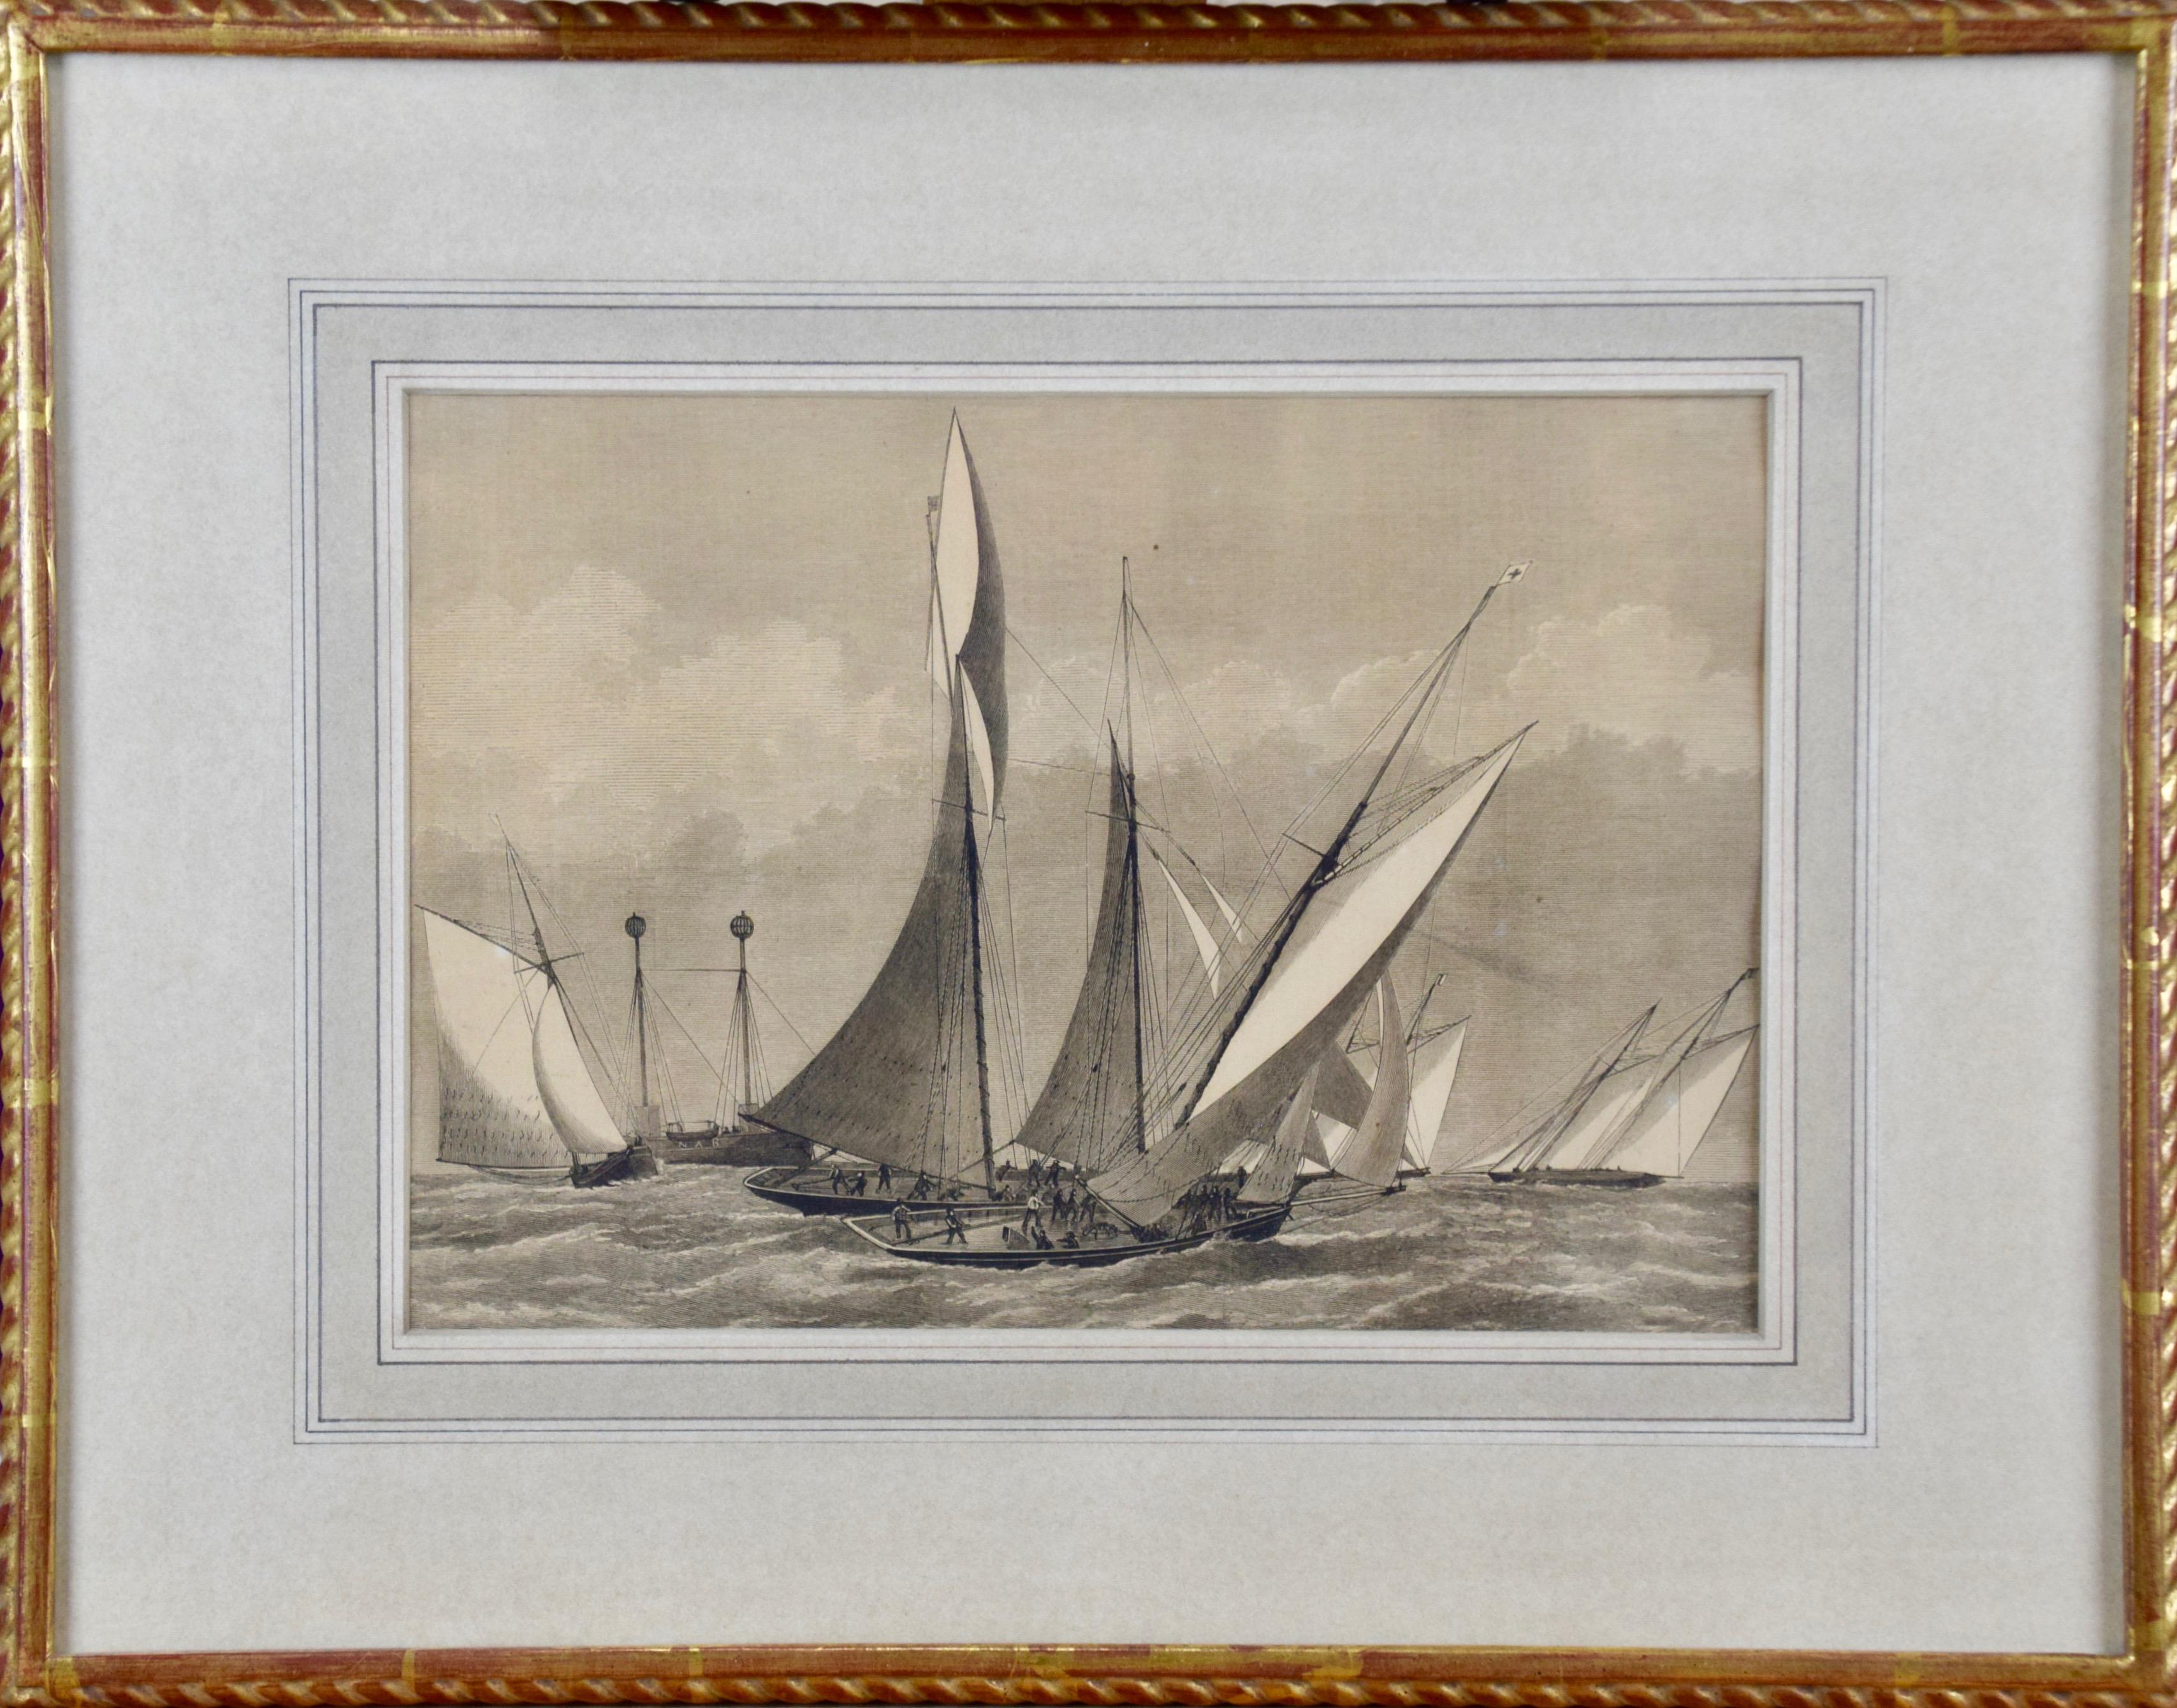 1885 America's Cup Sailing Yachts: Set of 3 Original 19th C. Engravings - Print by Unknown